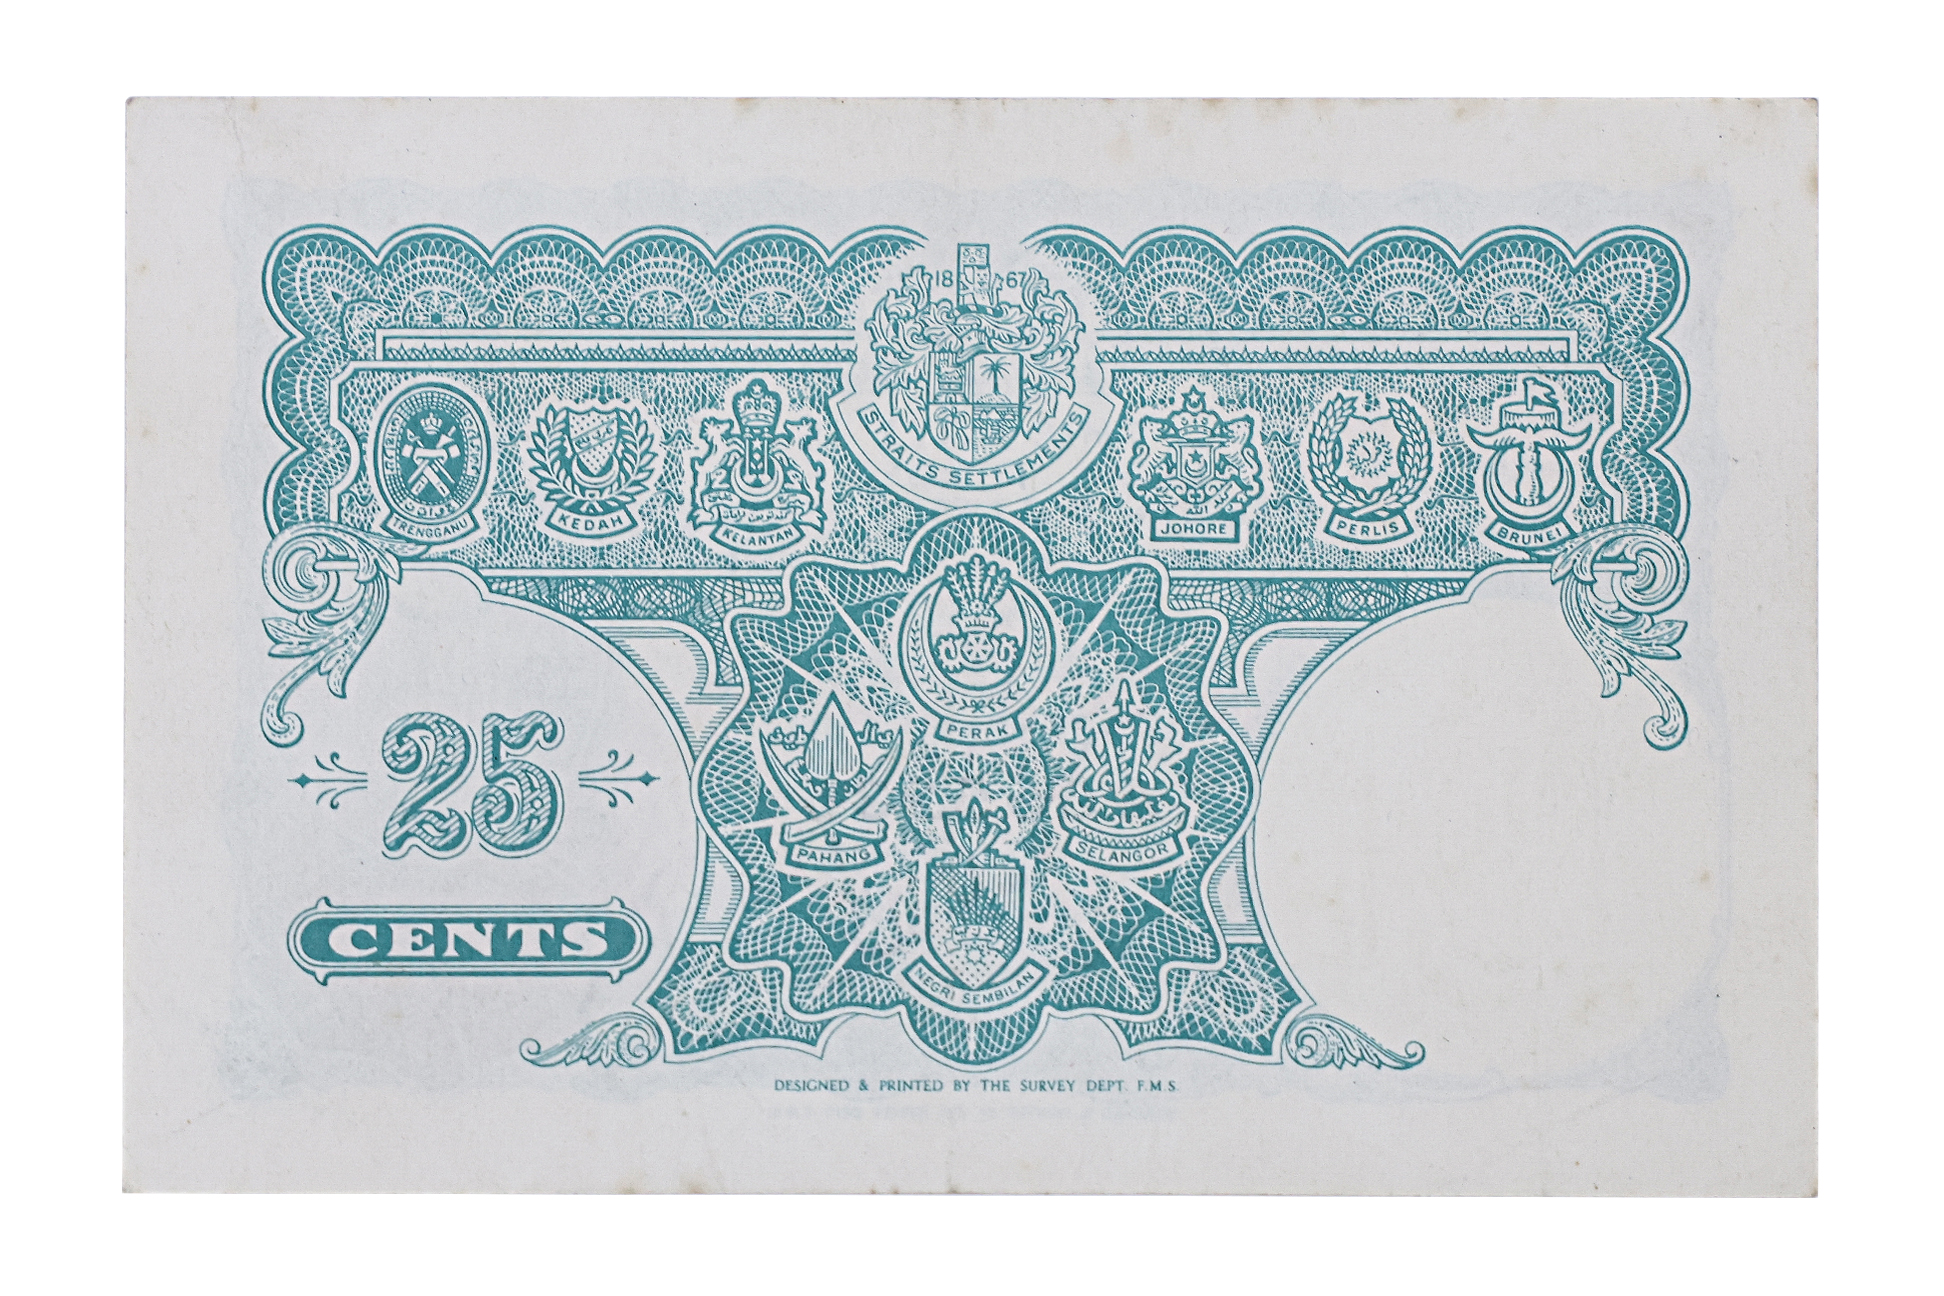 MALAYA 25 CENTS 1940 - SERIAL LETTER A - Image 2 of 2